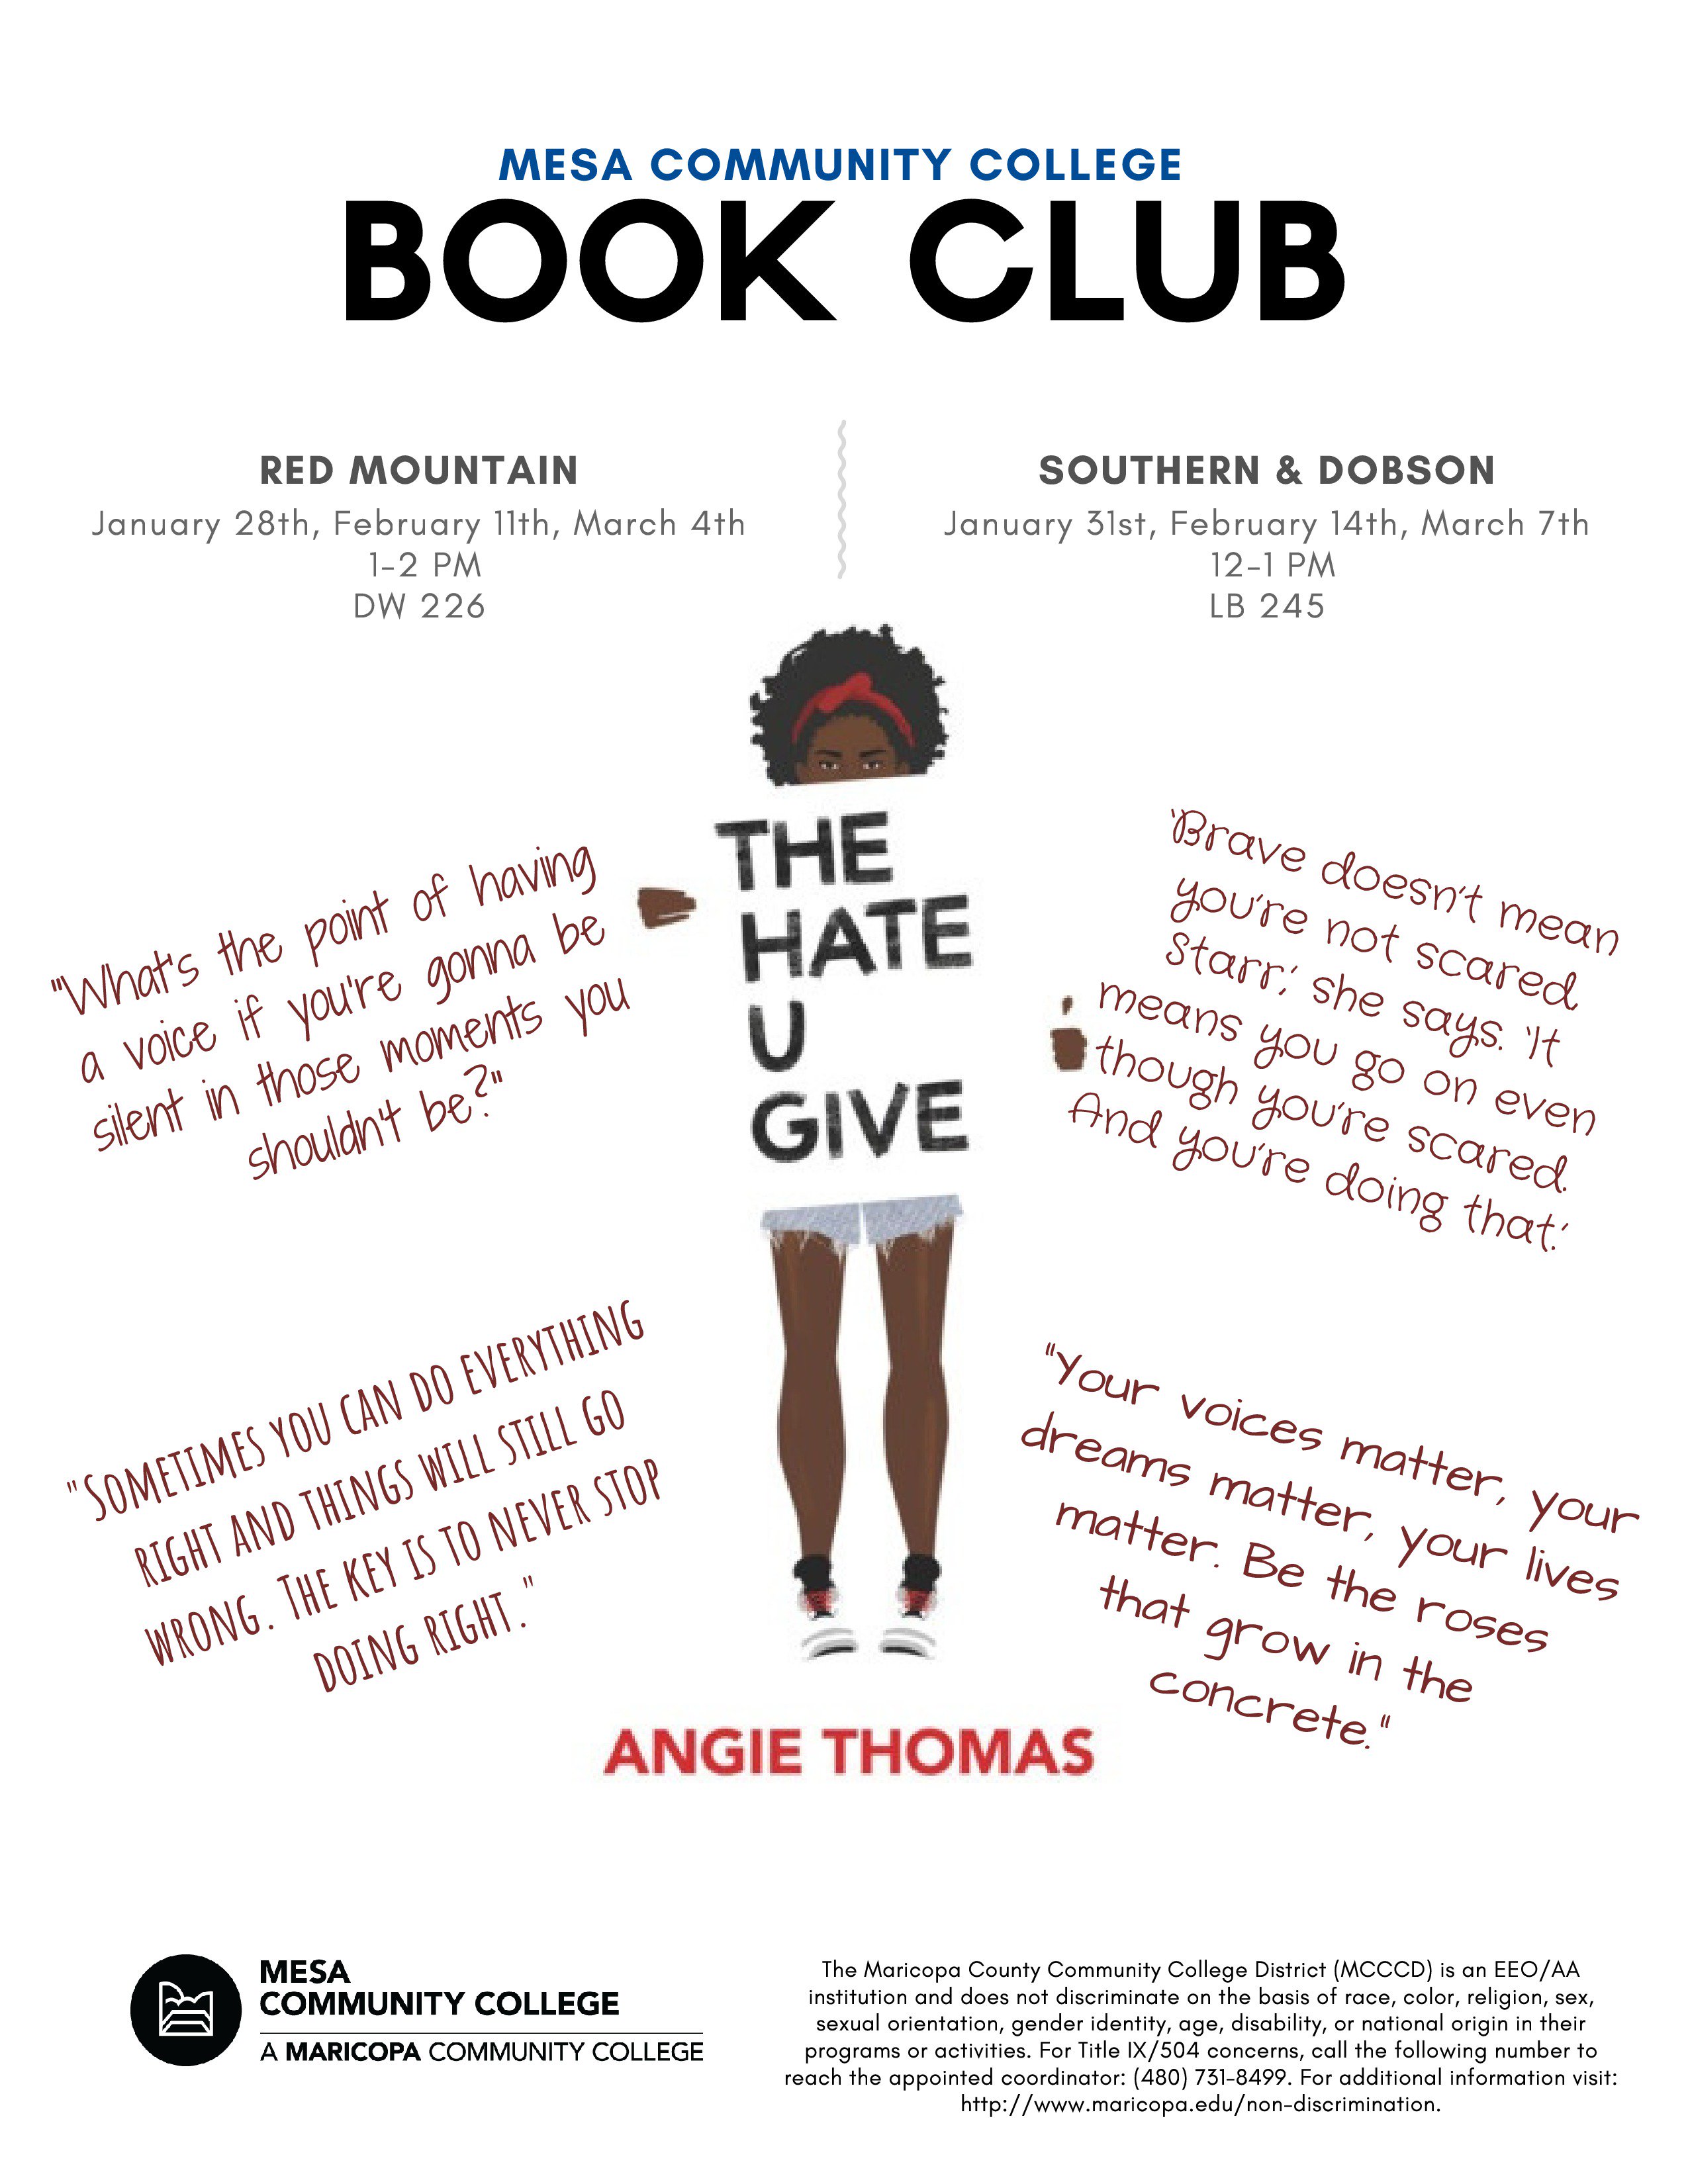 The Hate U Give: Finding “Teachable Moments” in the Classroom